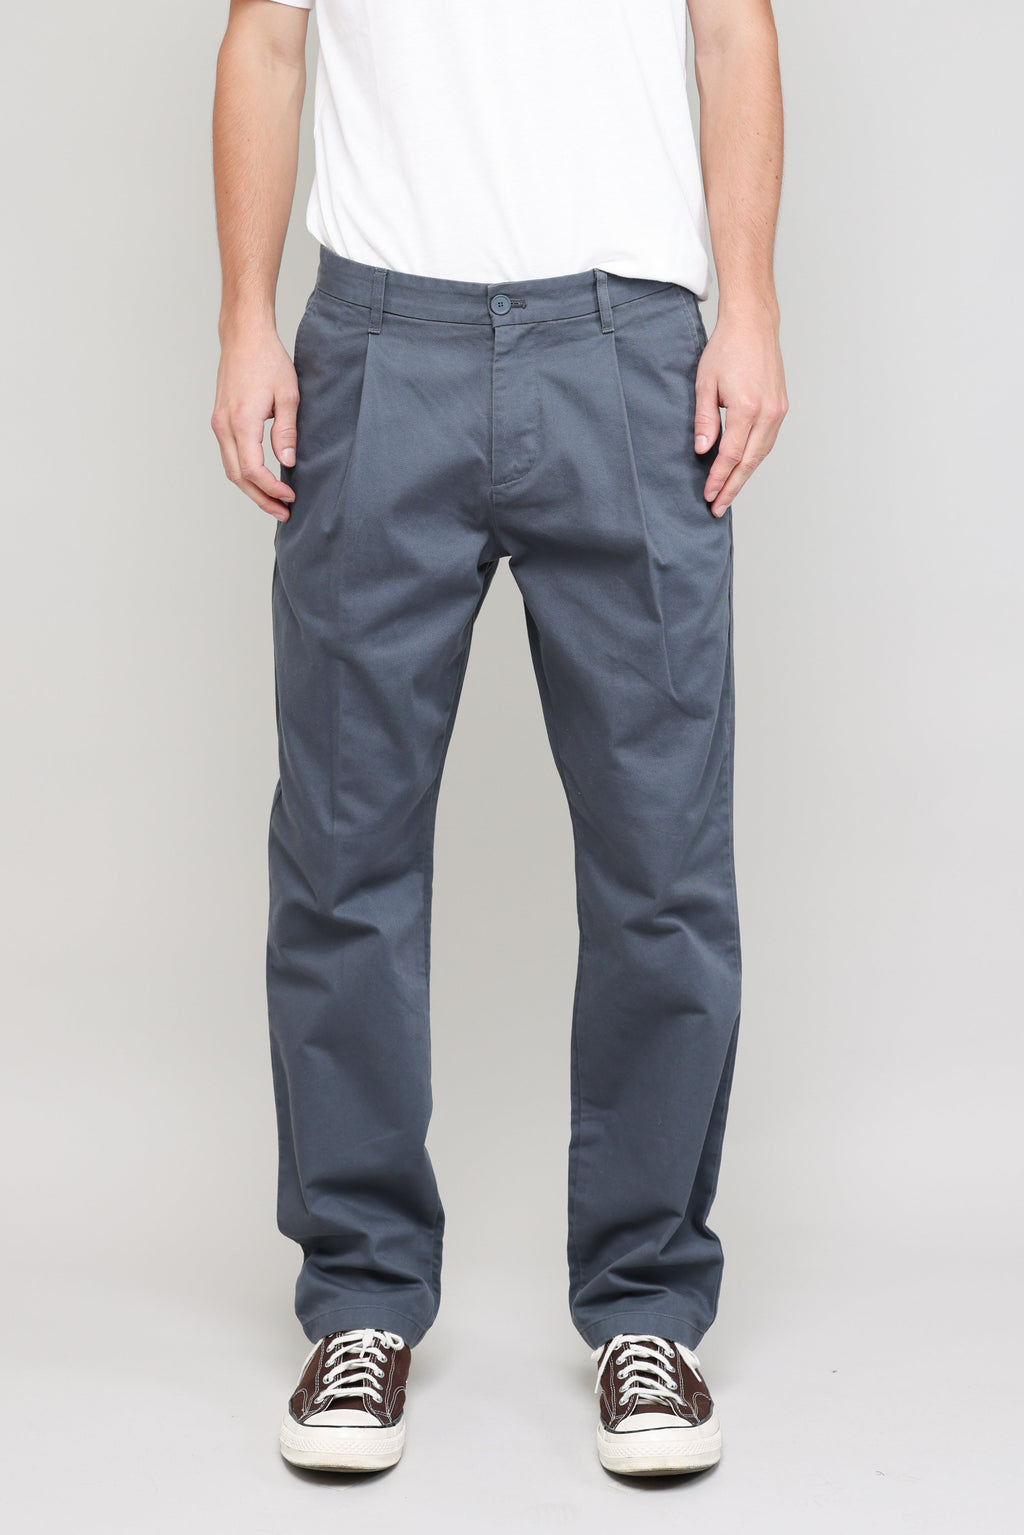 Pleated Chino Vintage French Drill in Blue Grey 05